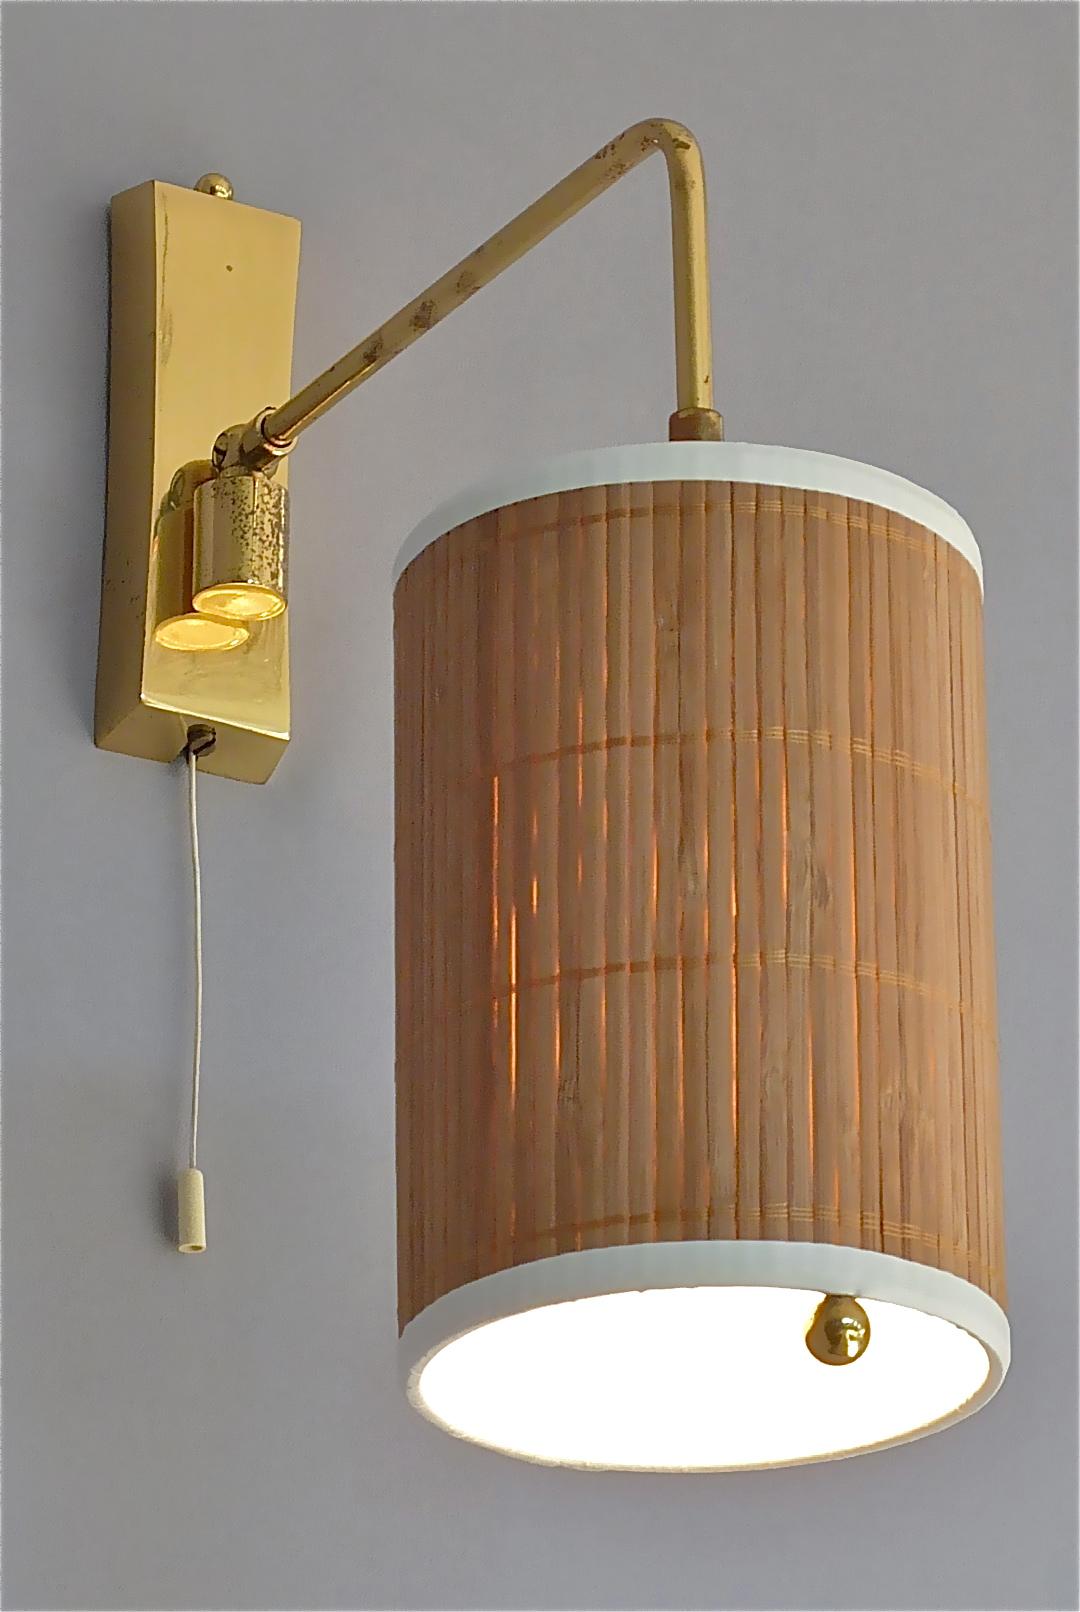 Wall Lamp Paavo Tynell Taito Oy Kalmar Style Brass Cane Wood Shade 1950s Sconce For Sale 1